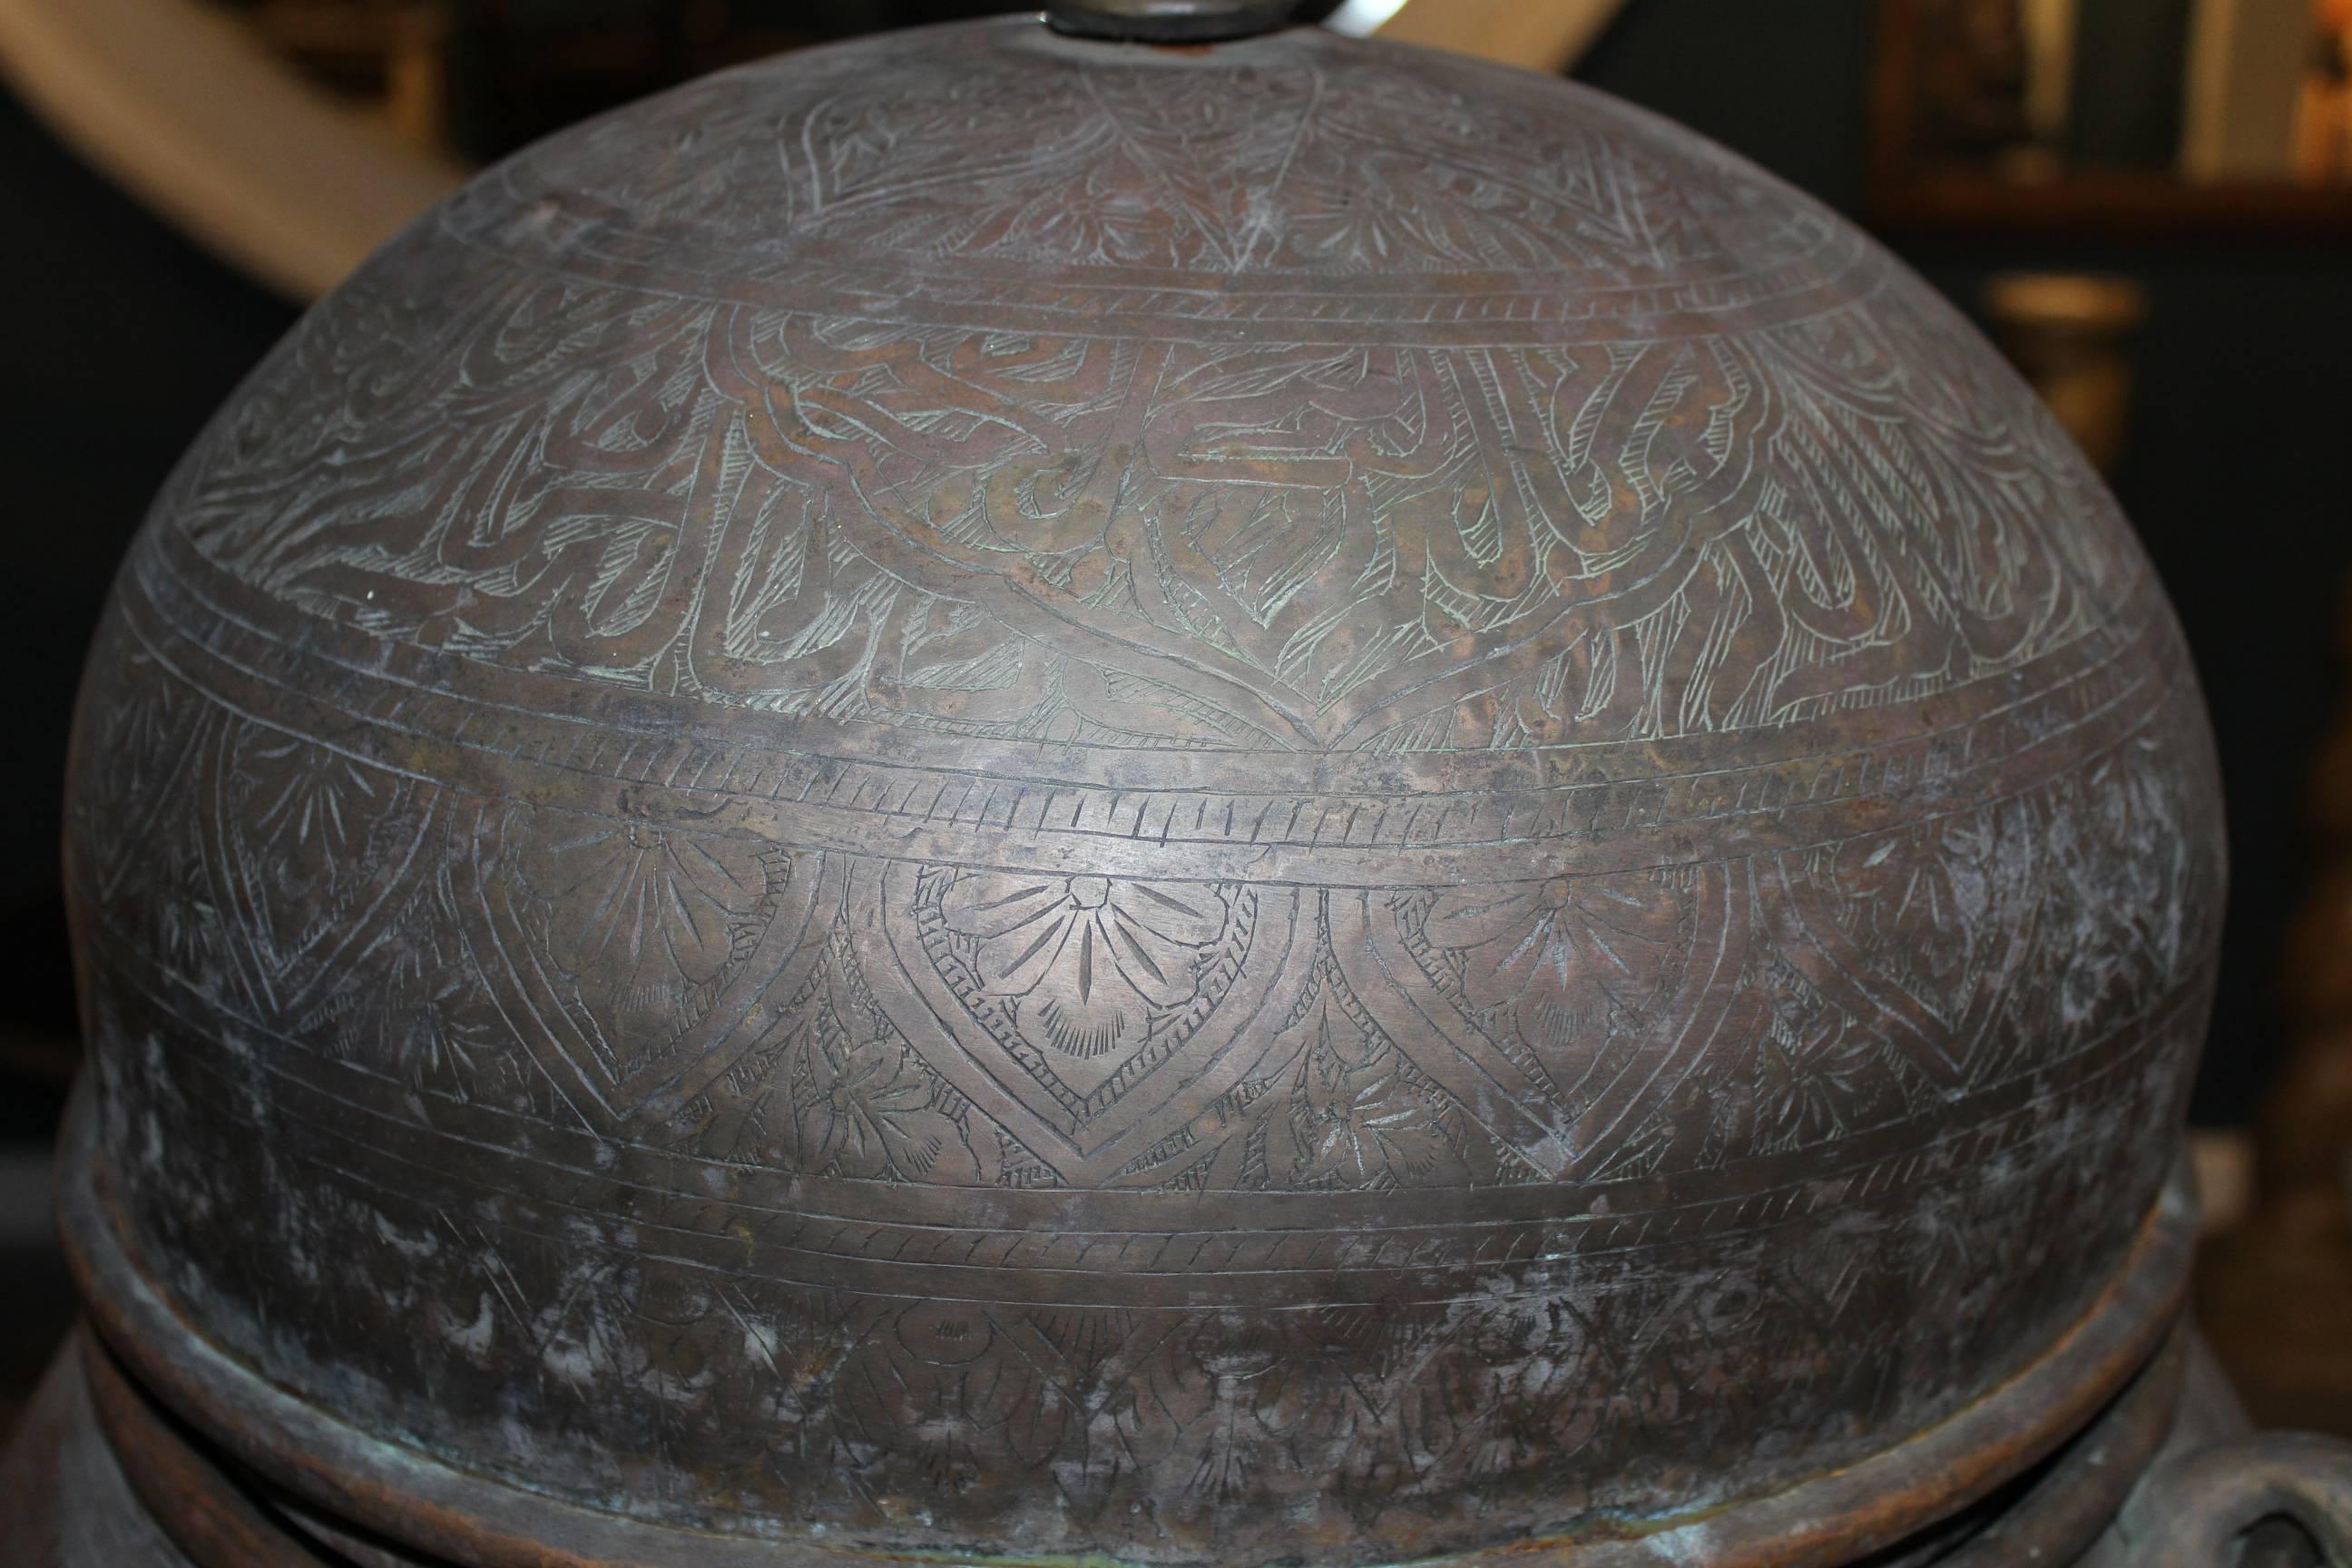 Hand-Crafted Large Middle Eastern or Persian Covered Copper Urn or Centerpiece